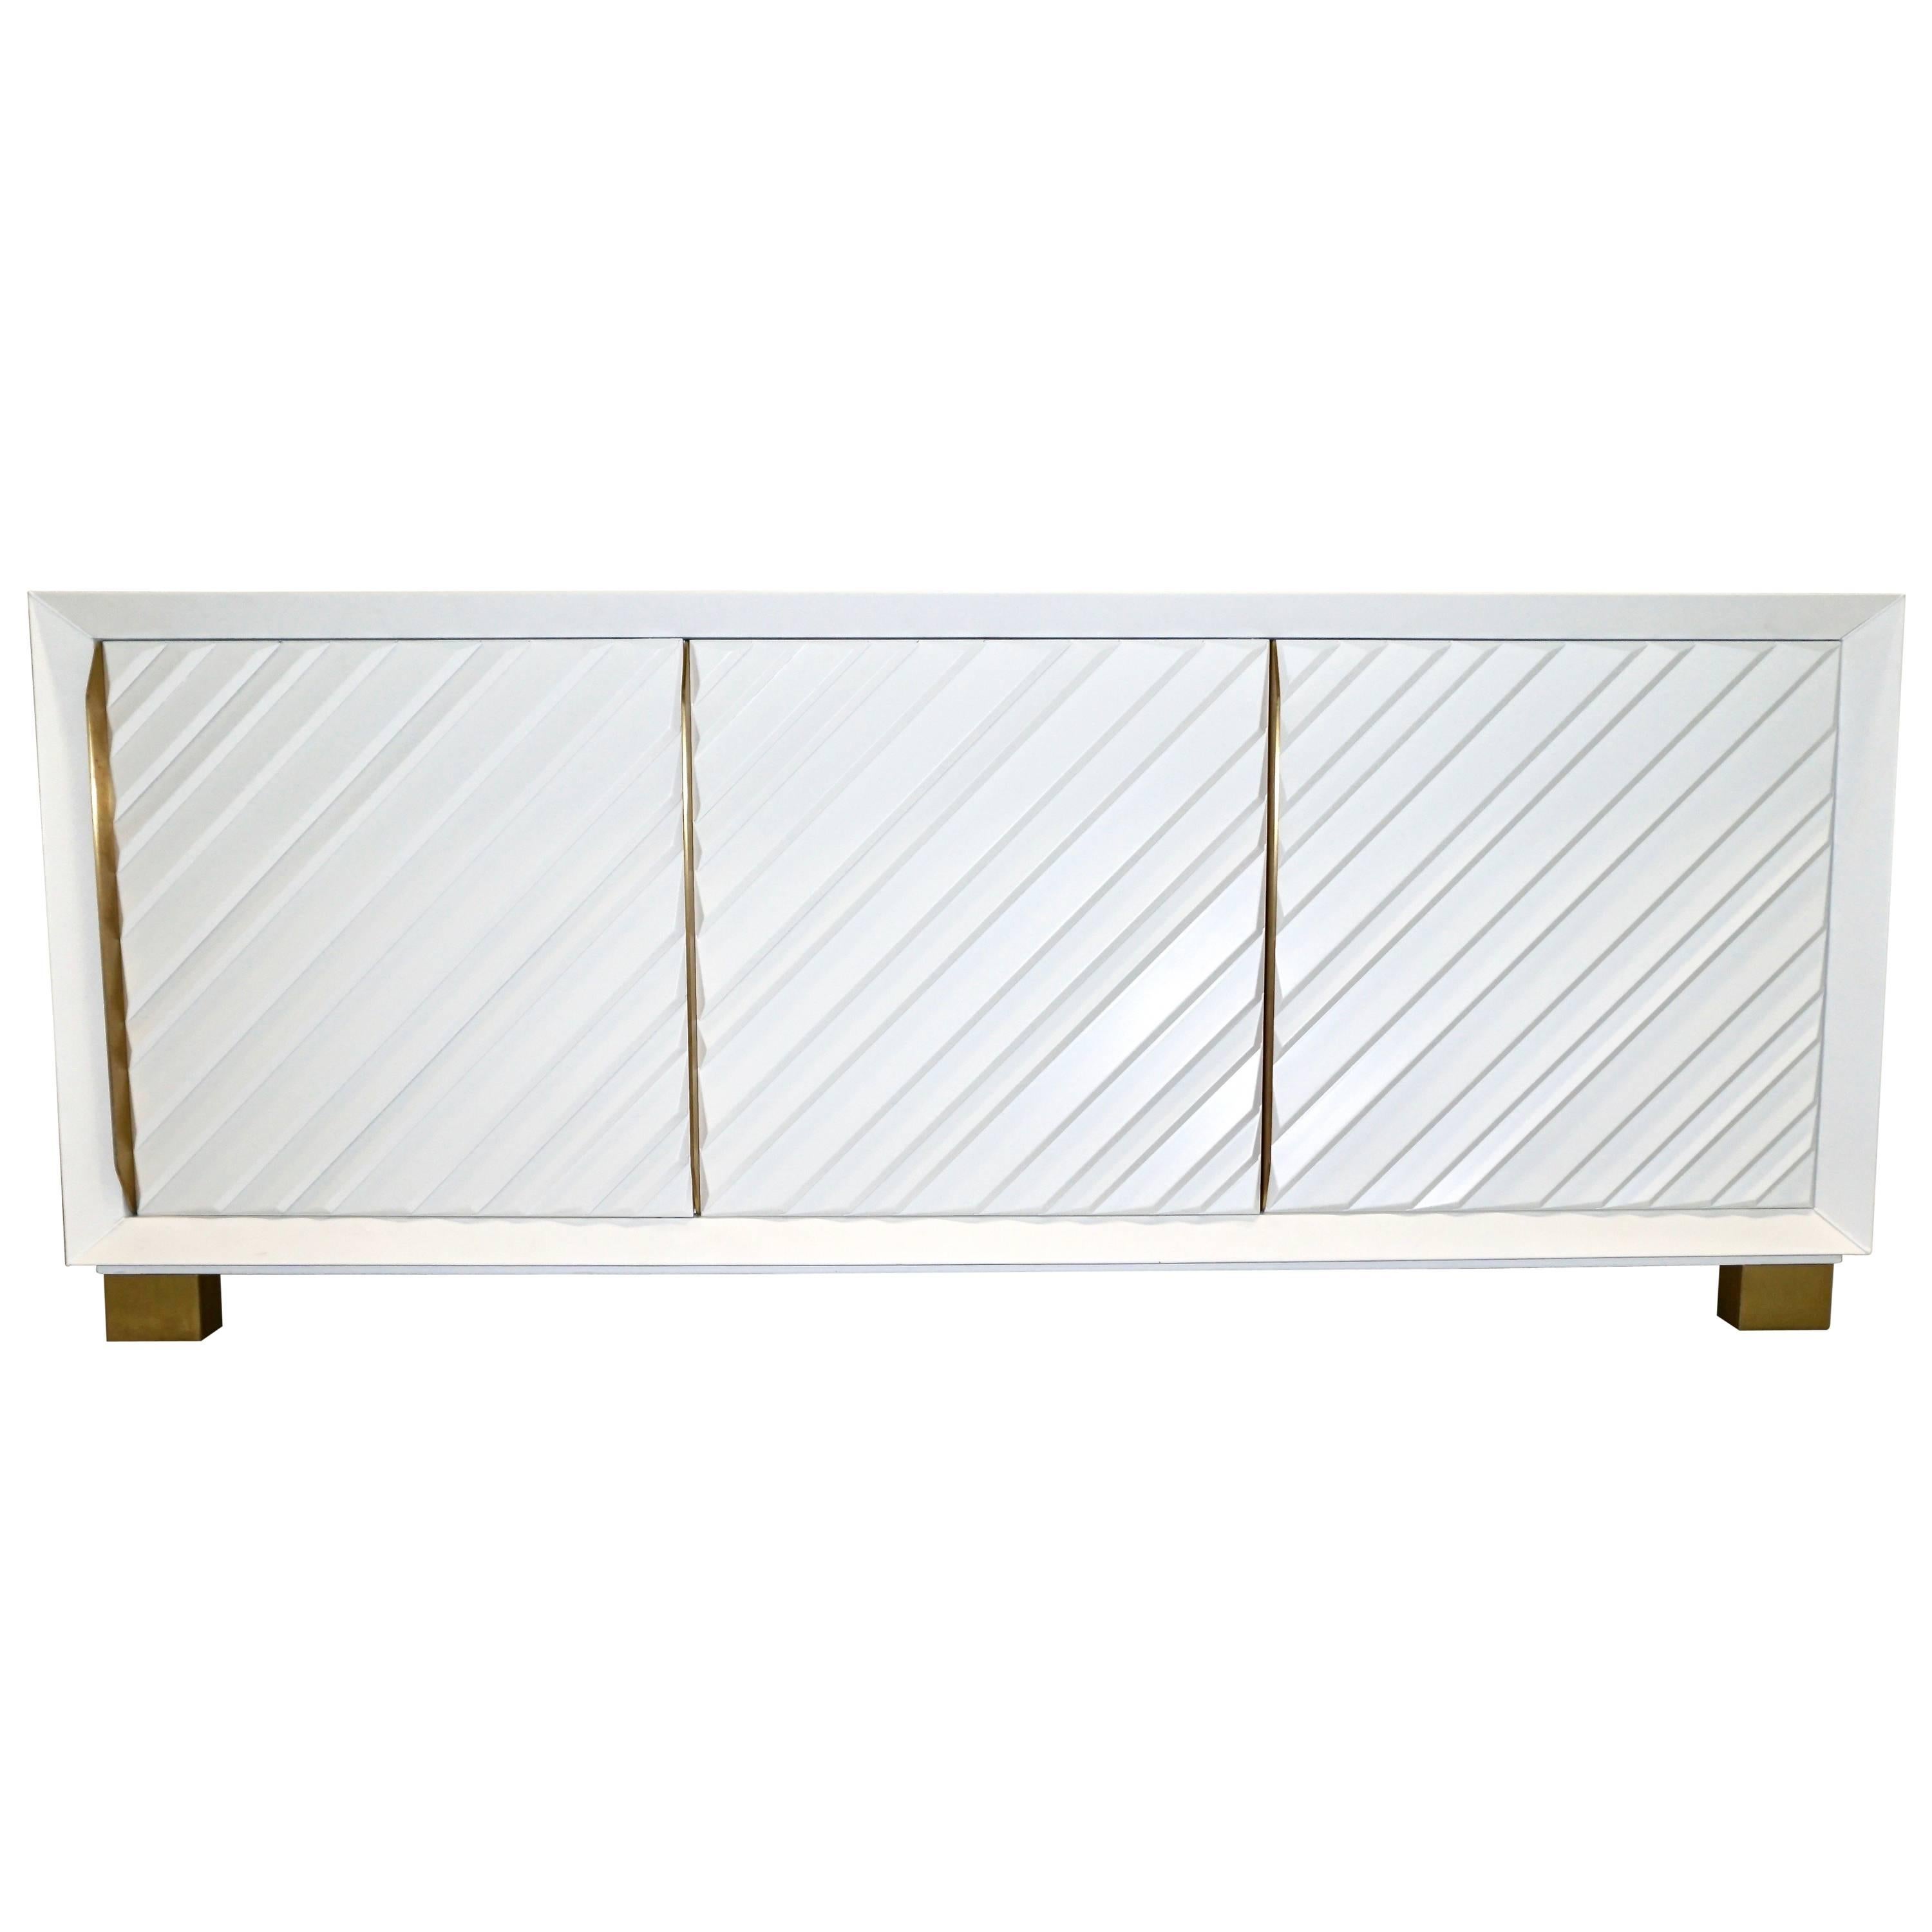 Frigerio 1970s Italian White Lacquered Carved Wood Credenza or Dresser